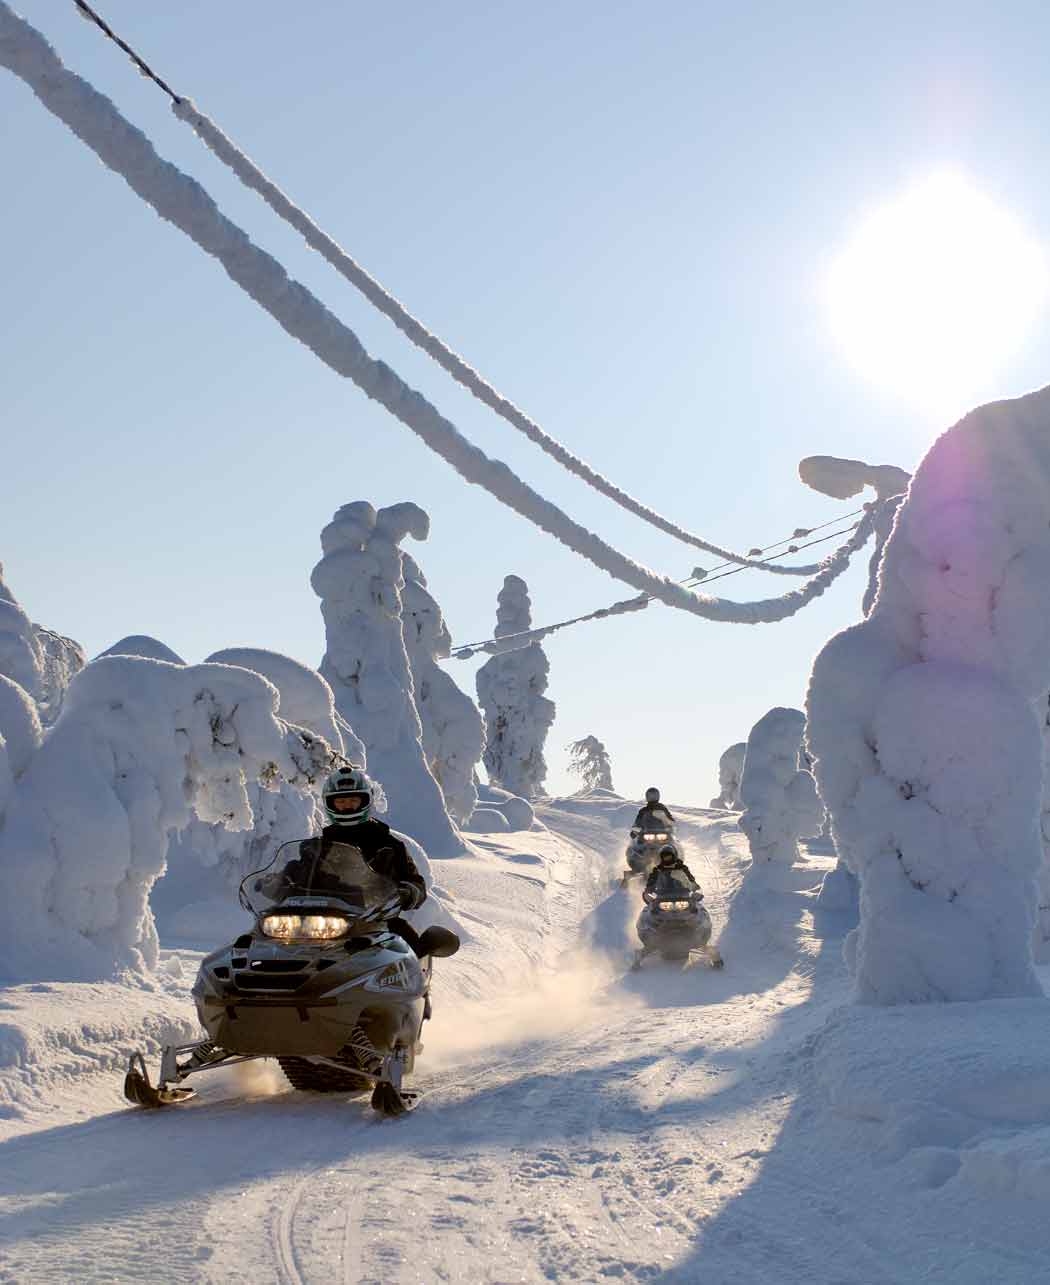 Snowmobile Holidays: Where adventure and freedom are still limitless